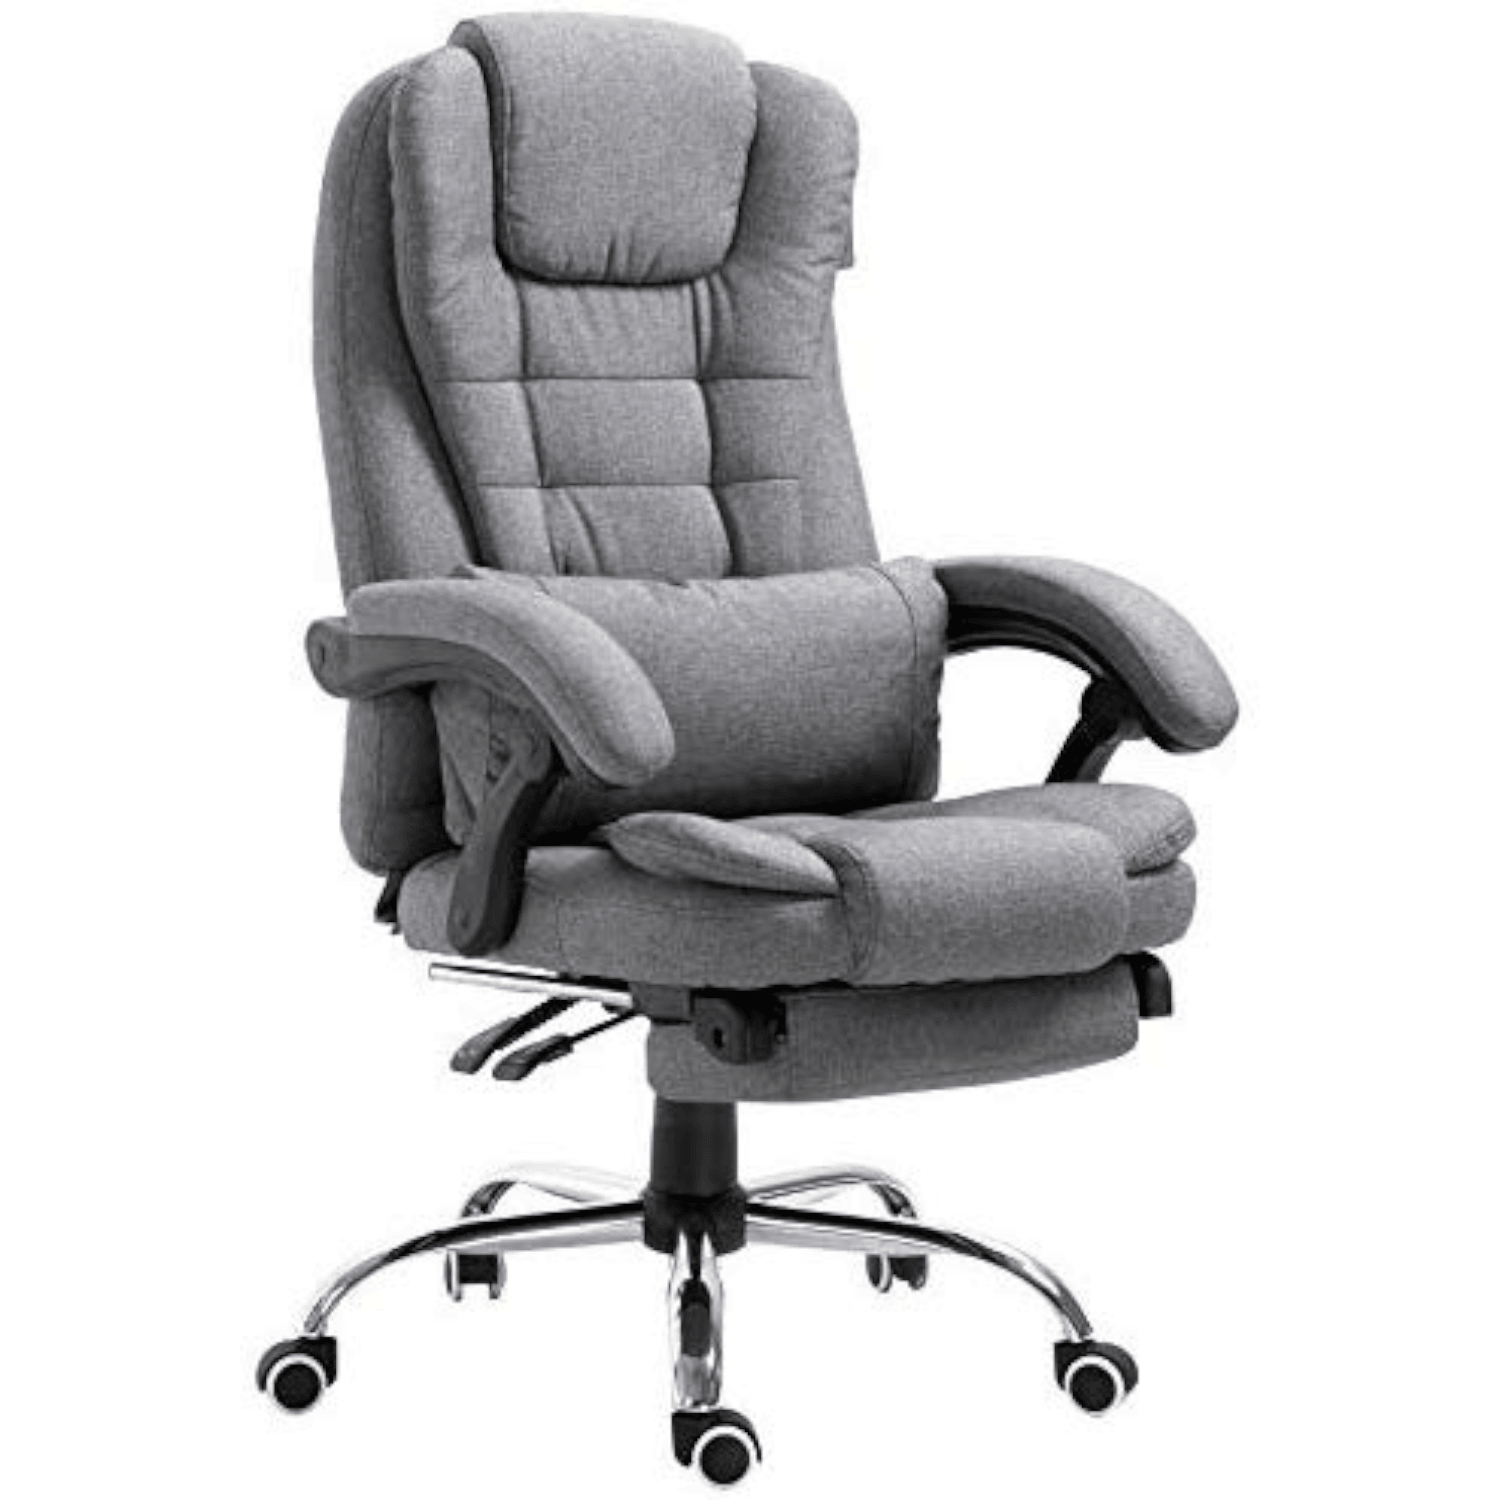 Executive Reclining Computer Desk Chair with Footrest, Headrest and Lumbar Cushion Support Furniture, MR34 Grey Fabric